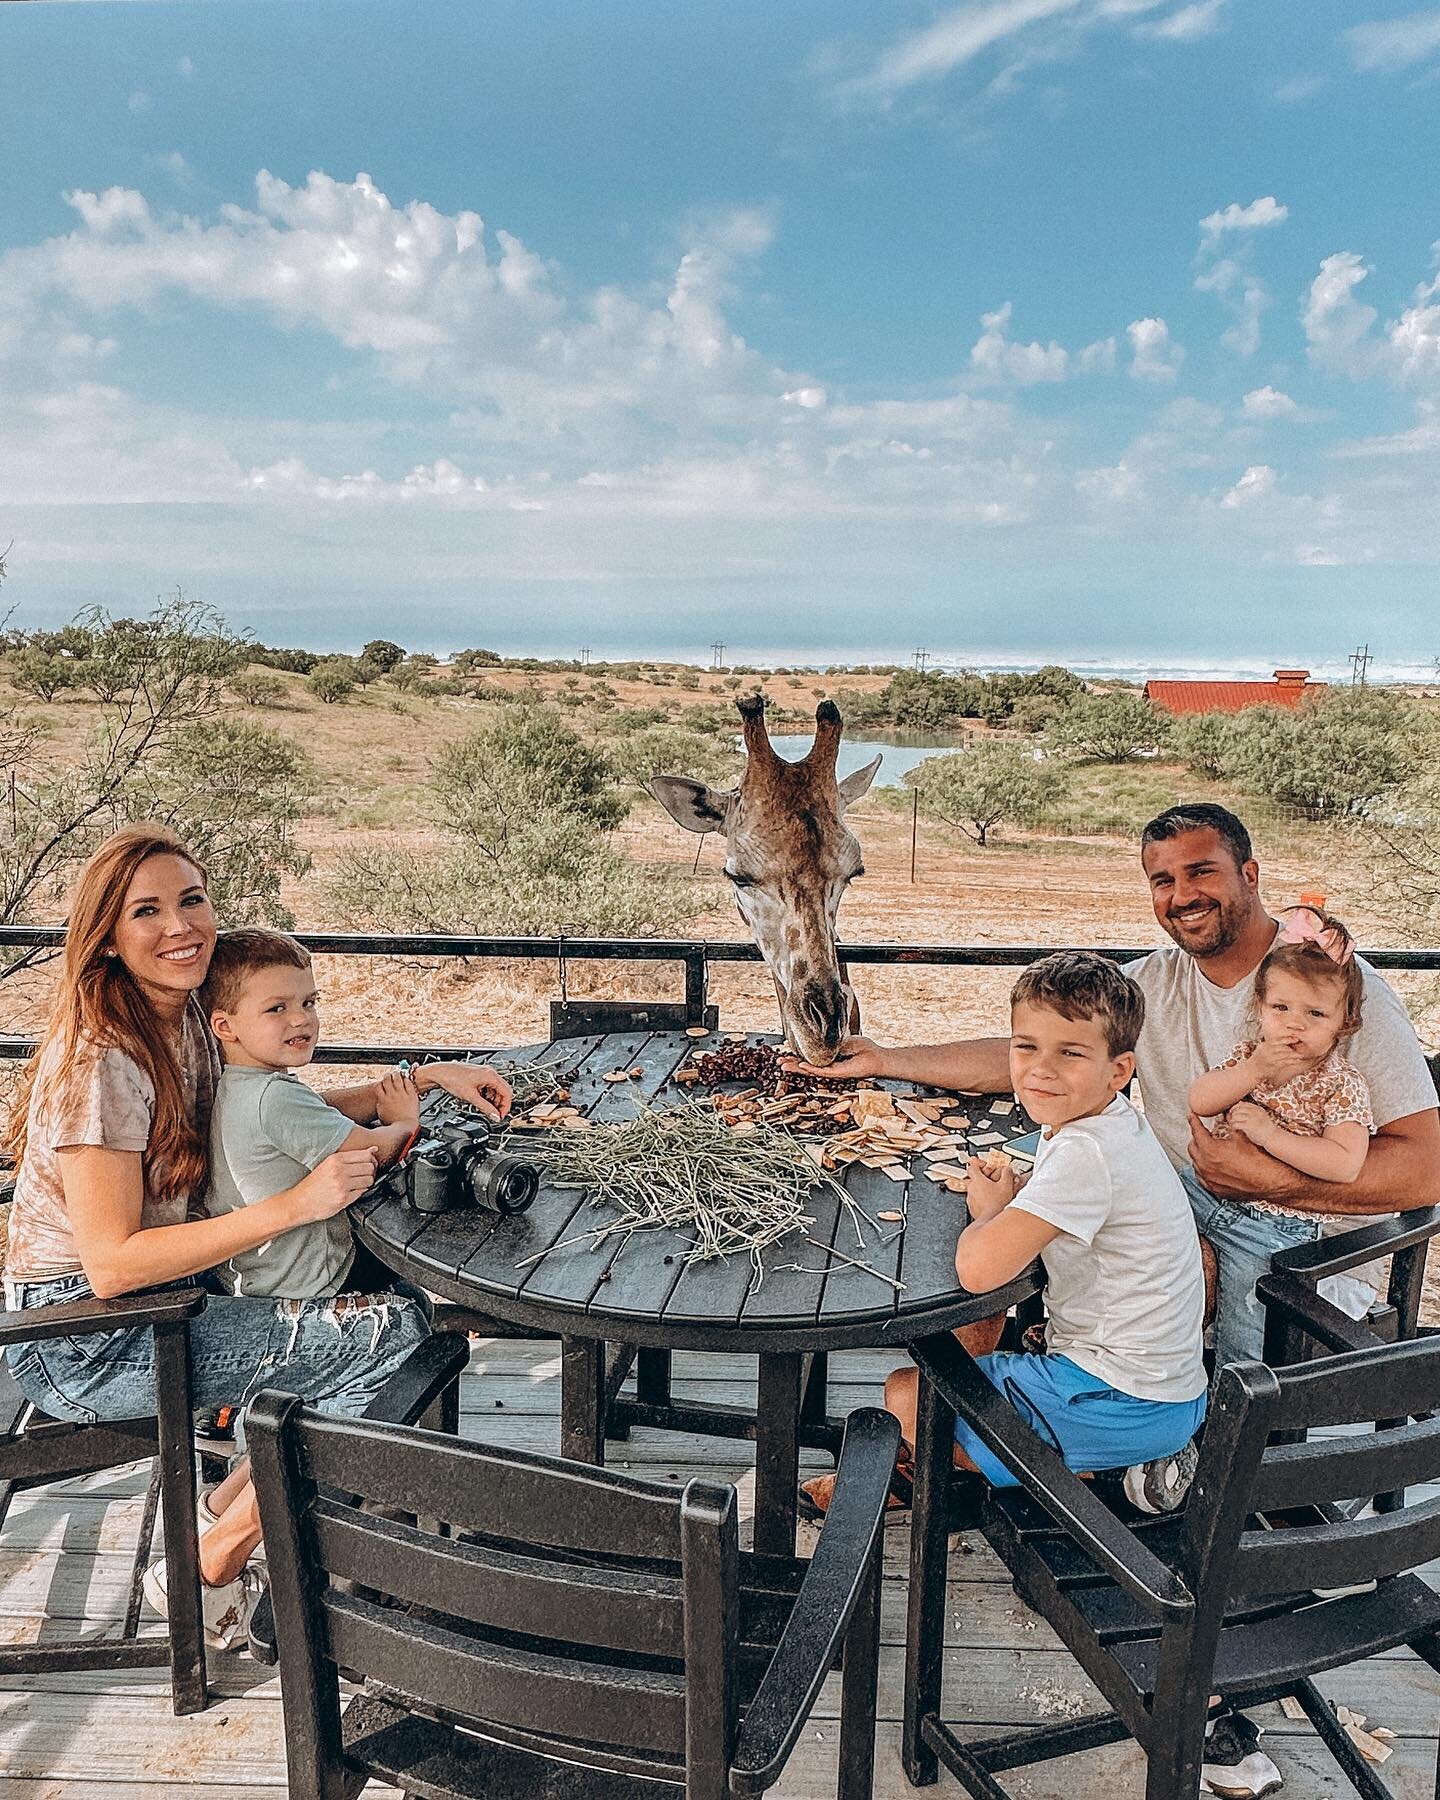 Snacking at sunset with Google the giraffe! 

This was the most fun charcuterie sharing I&rsquo;ve done with the family and the most up close, and personal experience with this sweet boy! 

We just had the time of our lives at @bluehillsranch and for